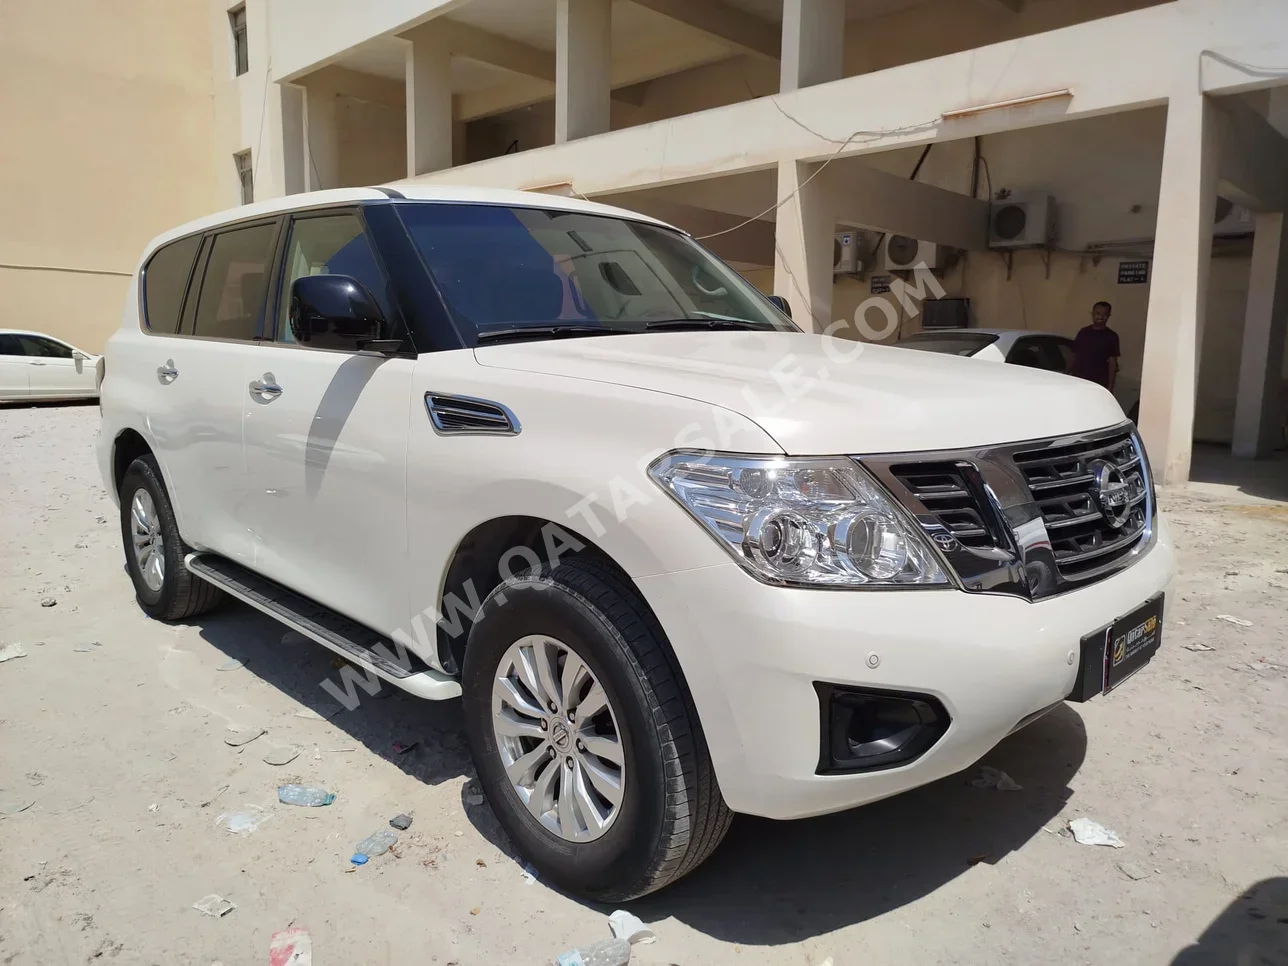 Nissan  Patrol  XE  2017  Automatic  204,000 Km  6 Cylinder  Four Wheel Drive (4WD)  SUV  White